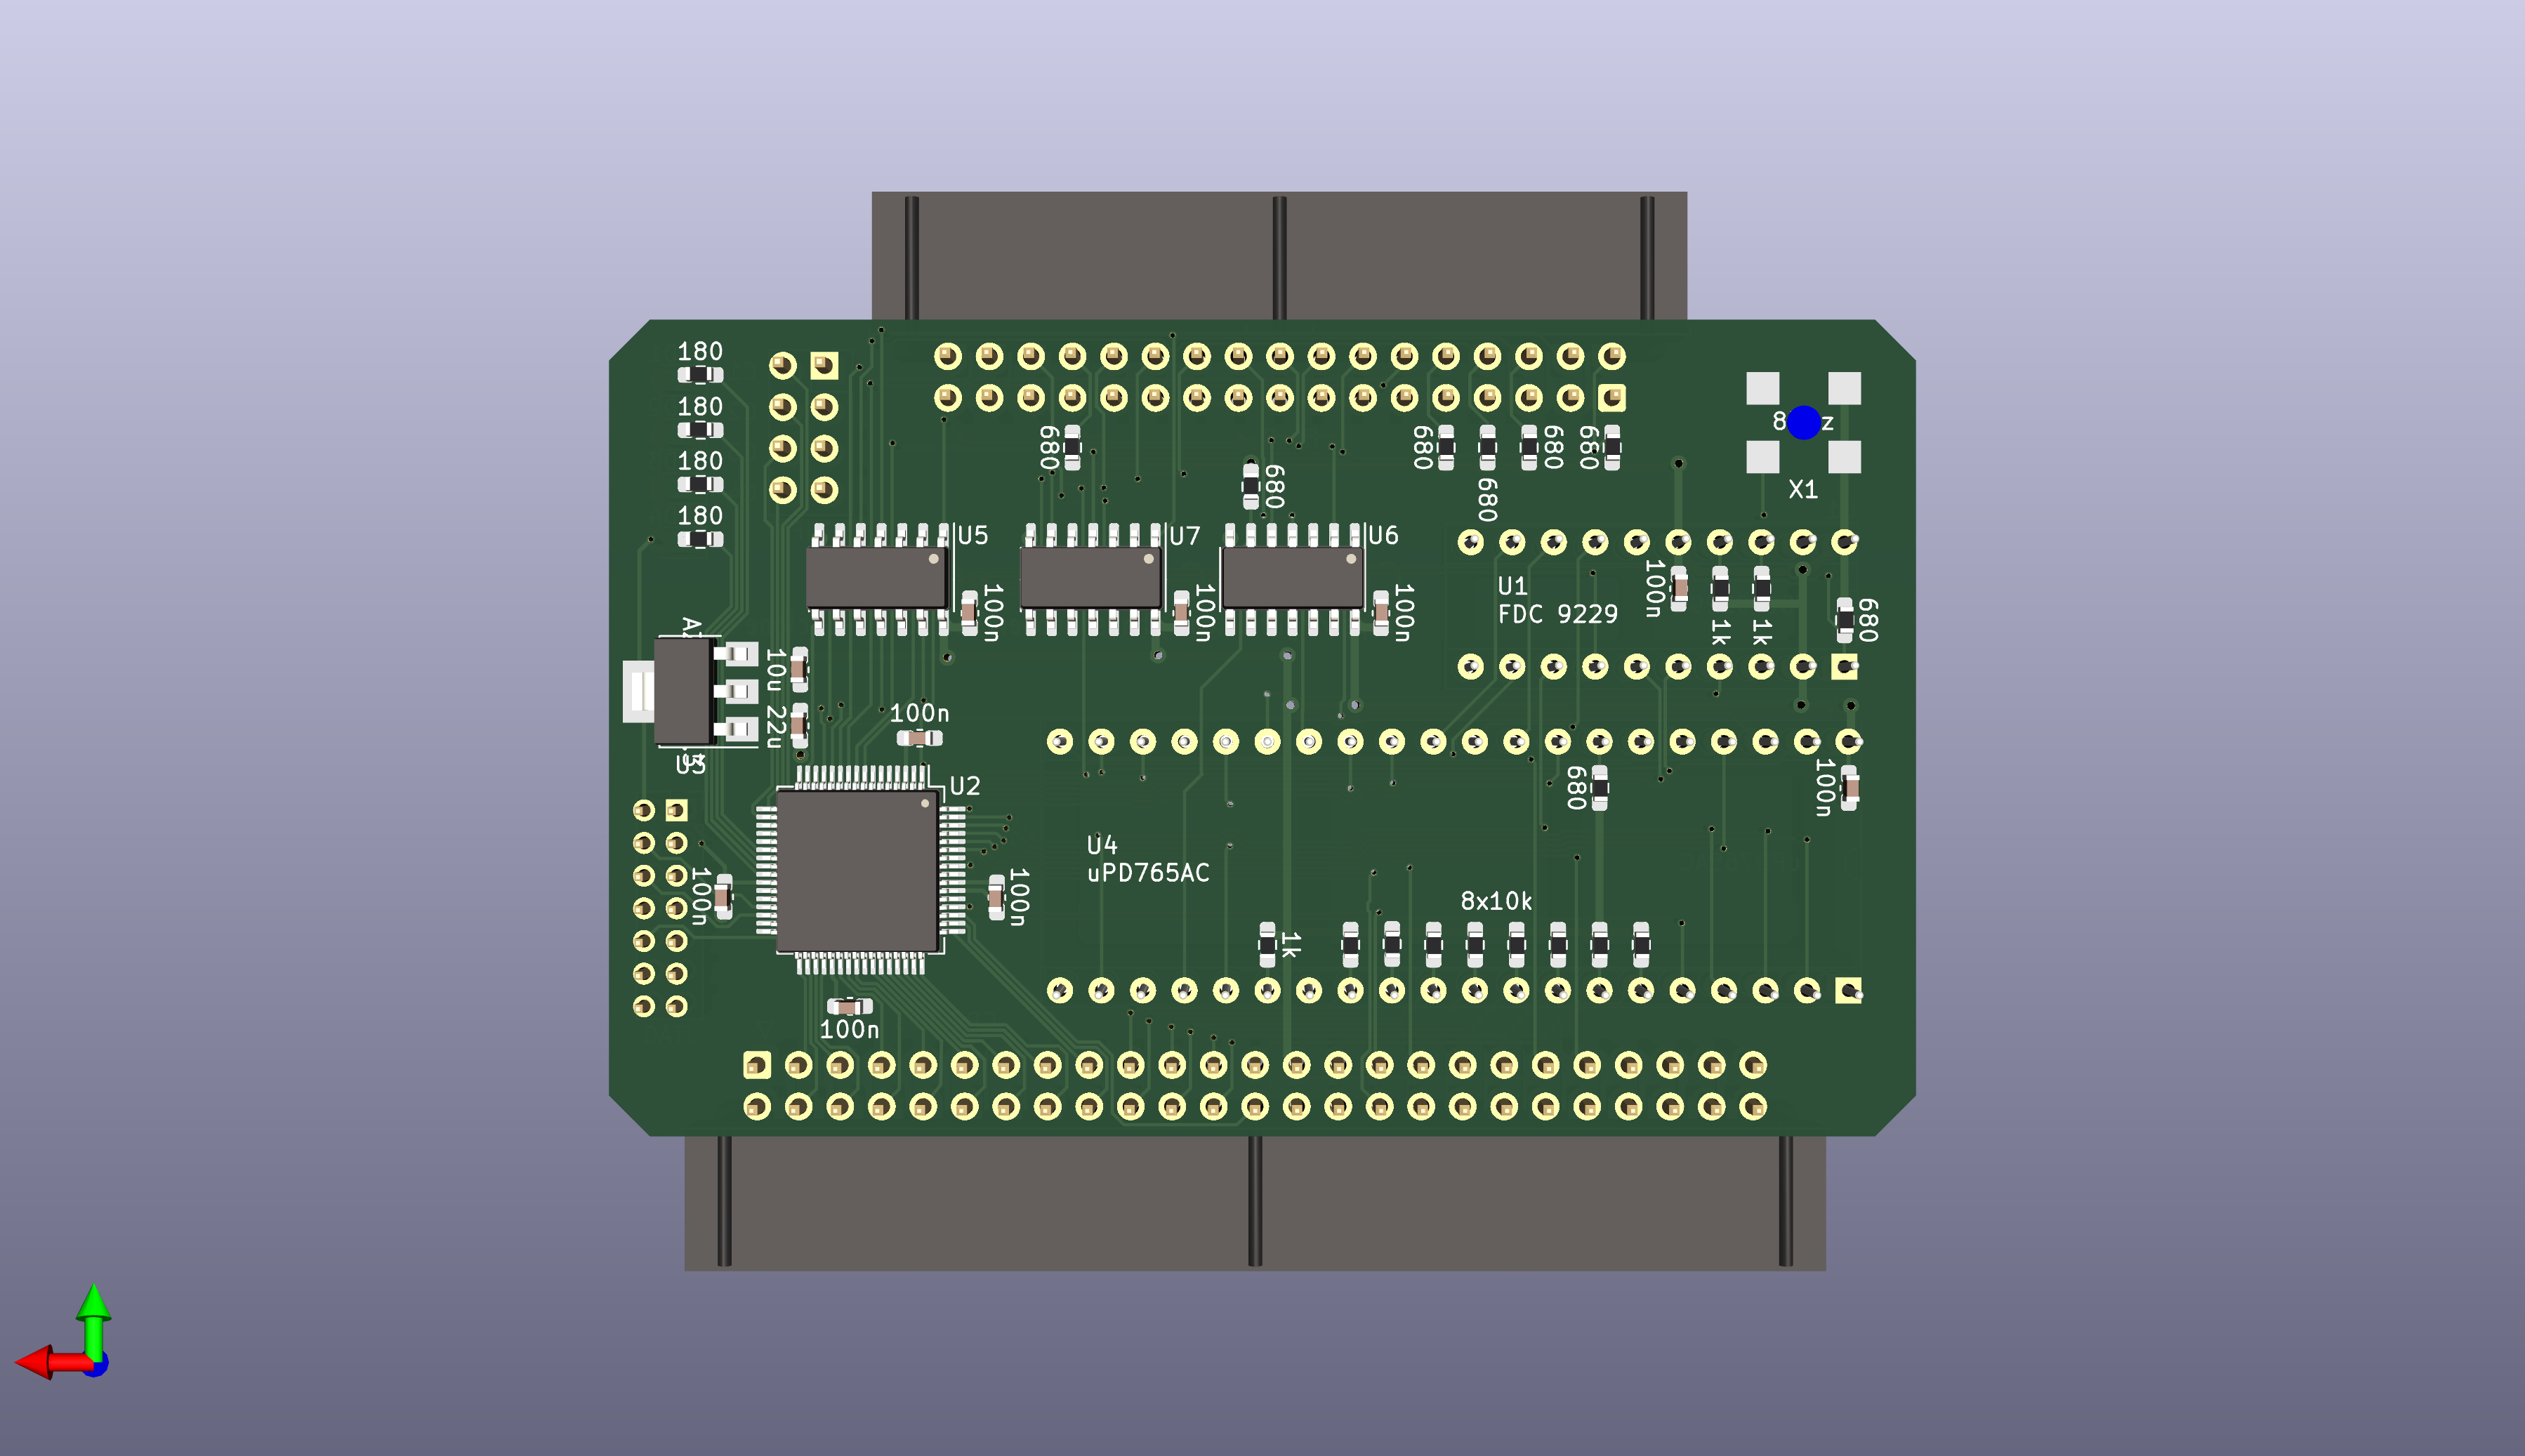 rendered picture of the no-rom-cpld variant (back)